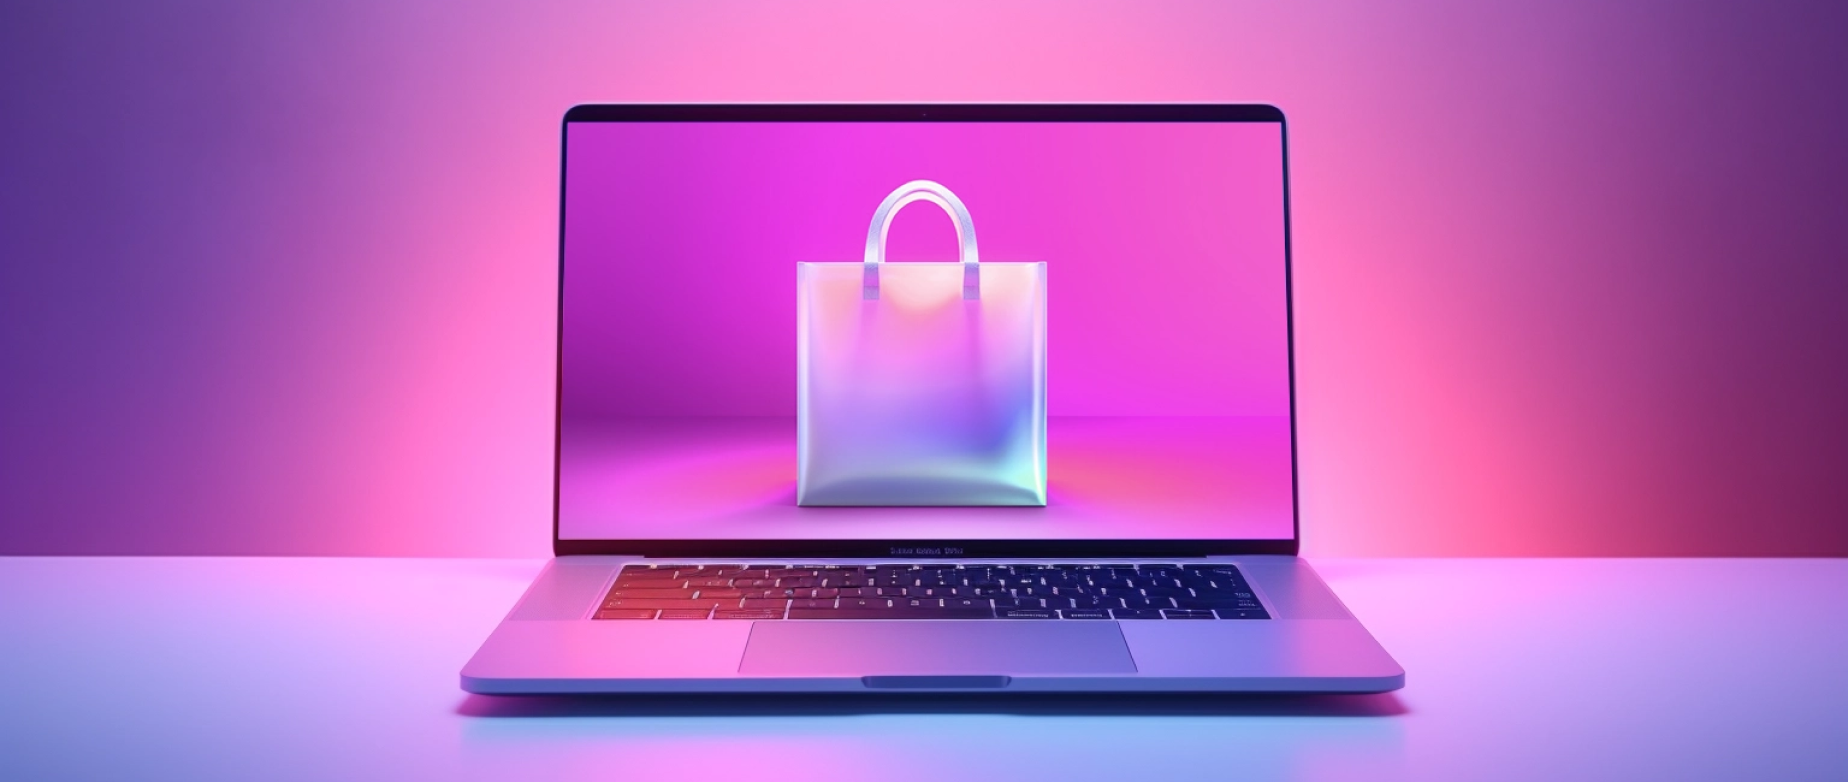 An illustration of a laptop displaying a shopping bag, representing the concept of an ecommerce platform.